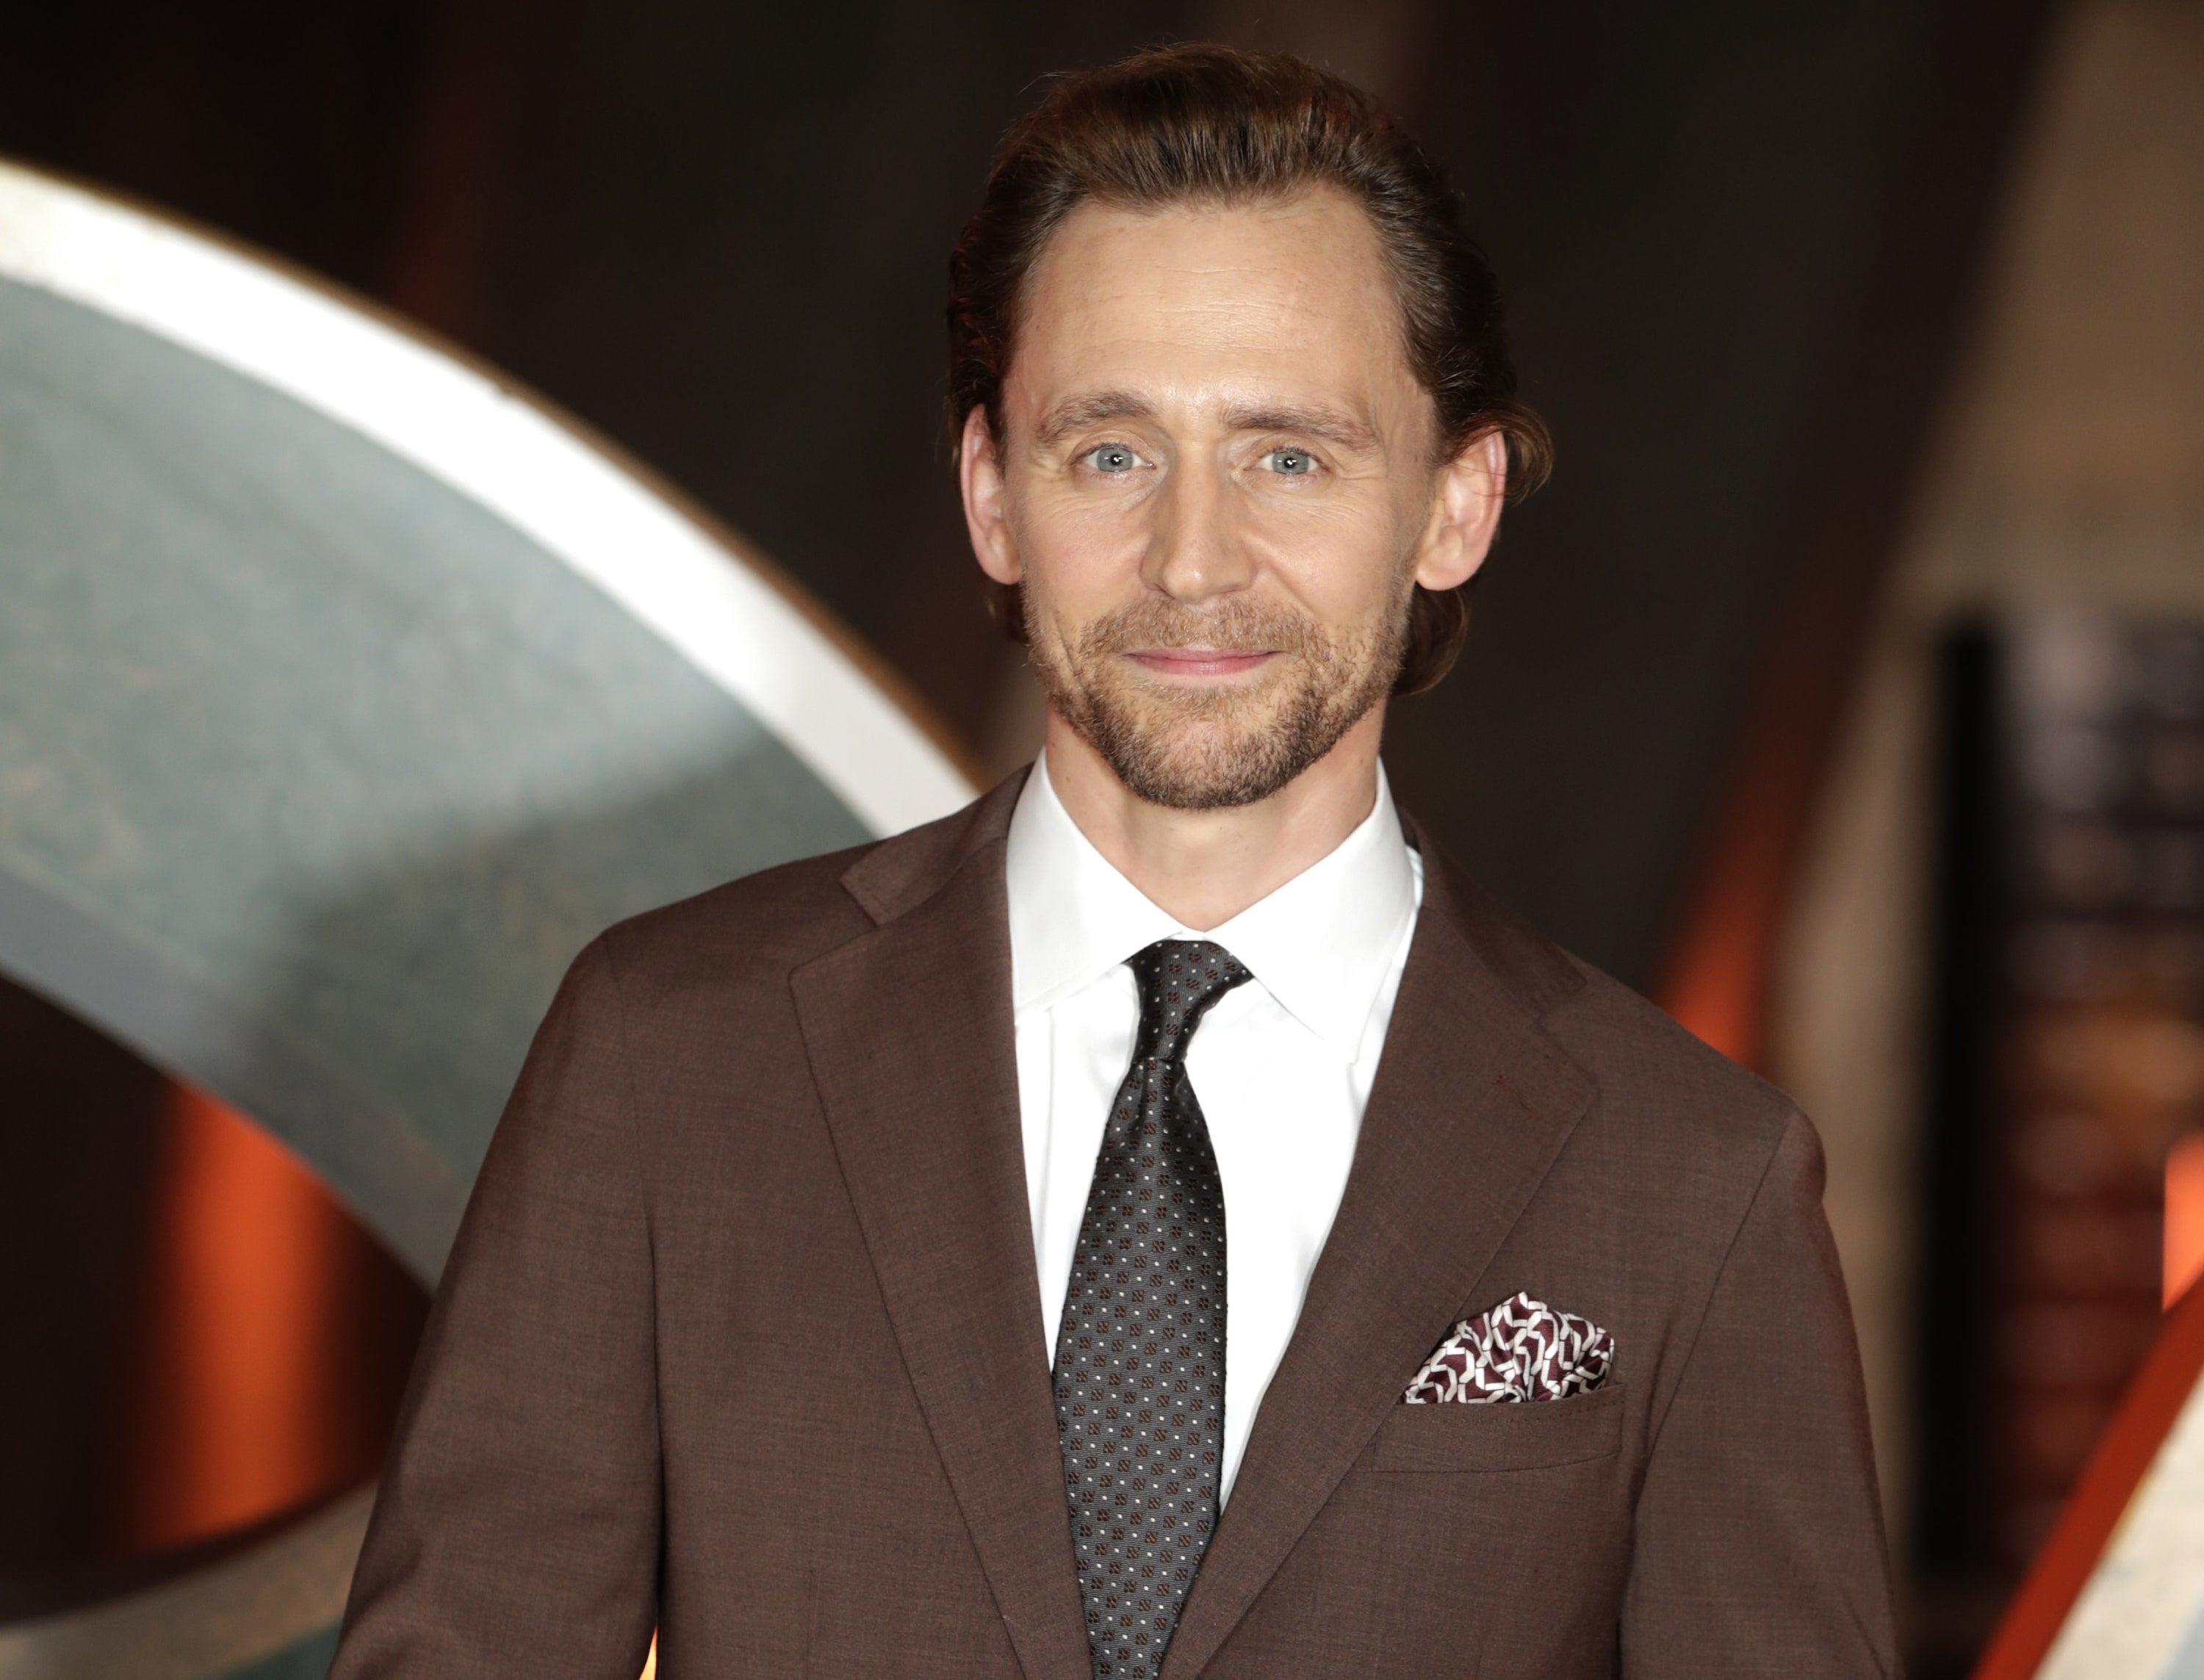 A close-up of Tom in a suit and smiling